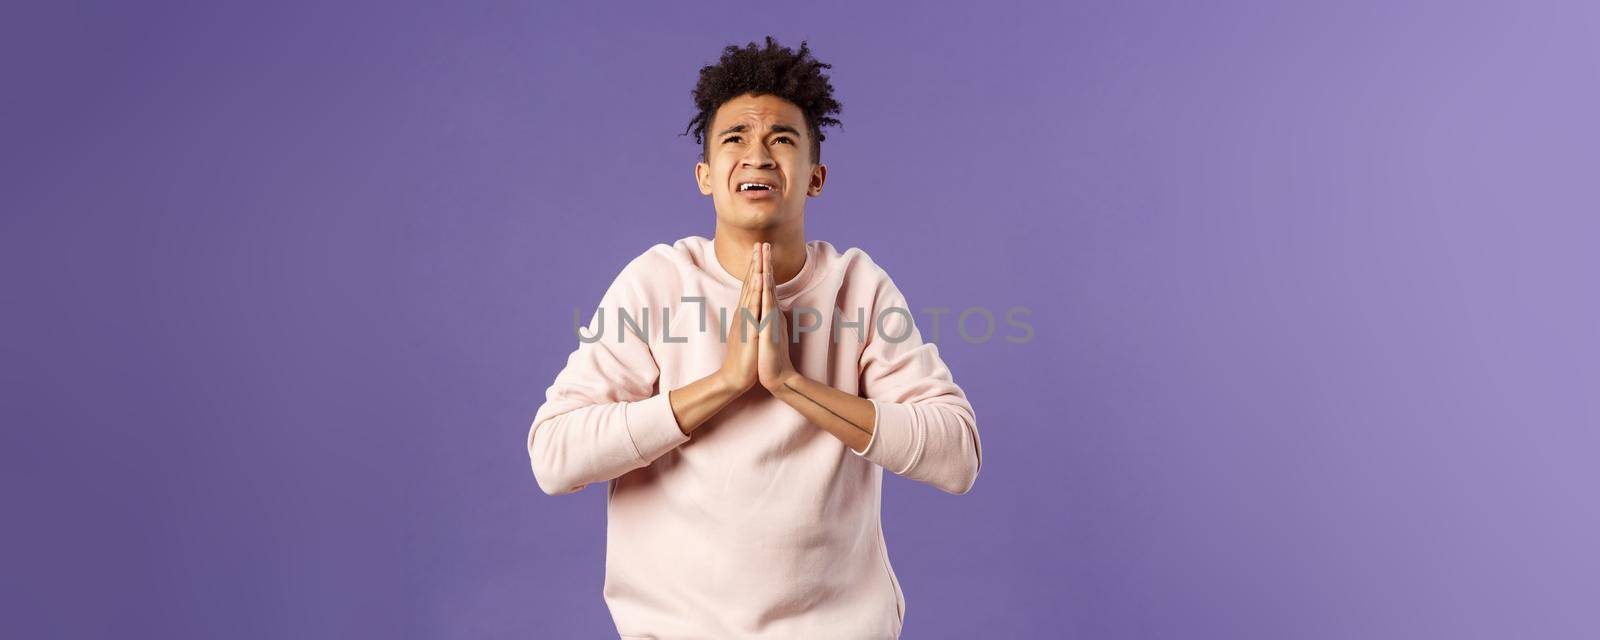 Portrait of young distressed and devestated hispanic guy pleading to god, have difficult situation, praying with hands clasped together over chest, look up supplicating desperate.